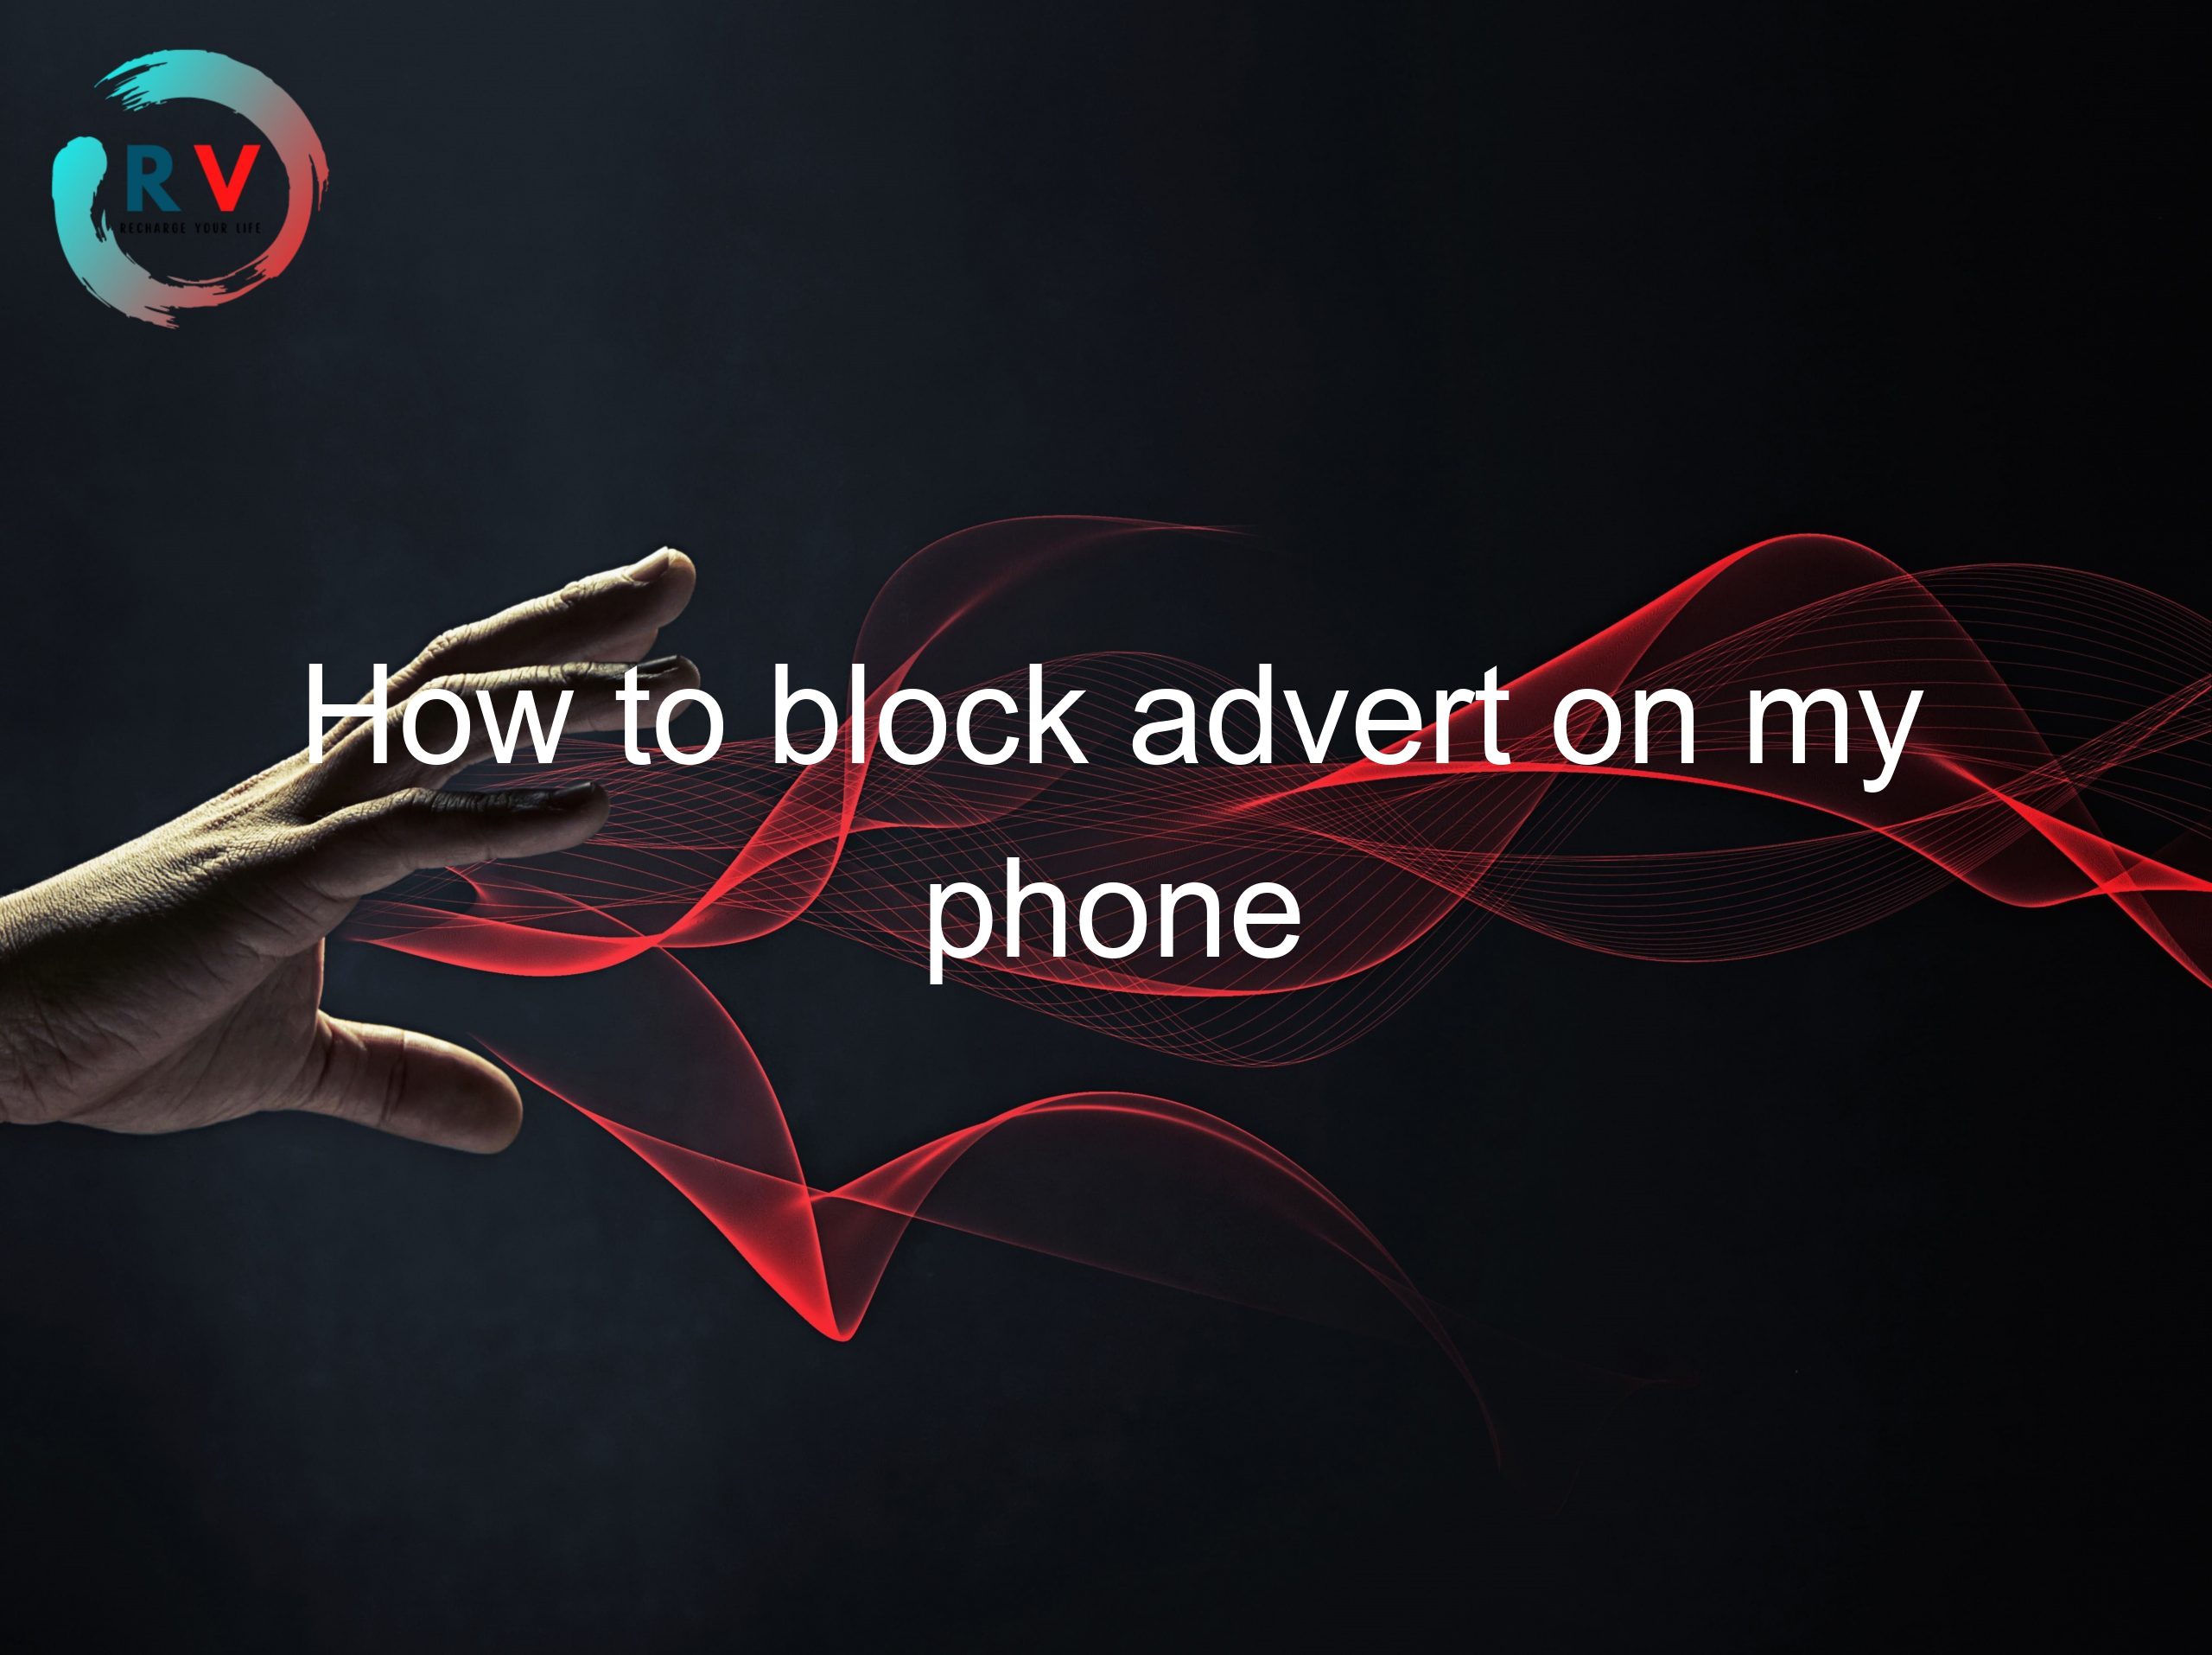 How to block advert on my phone